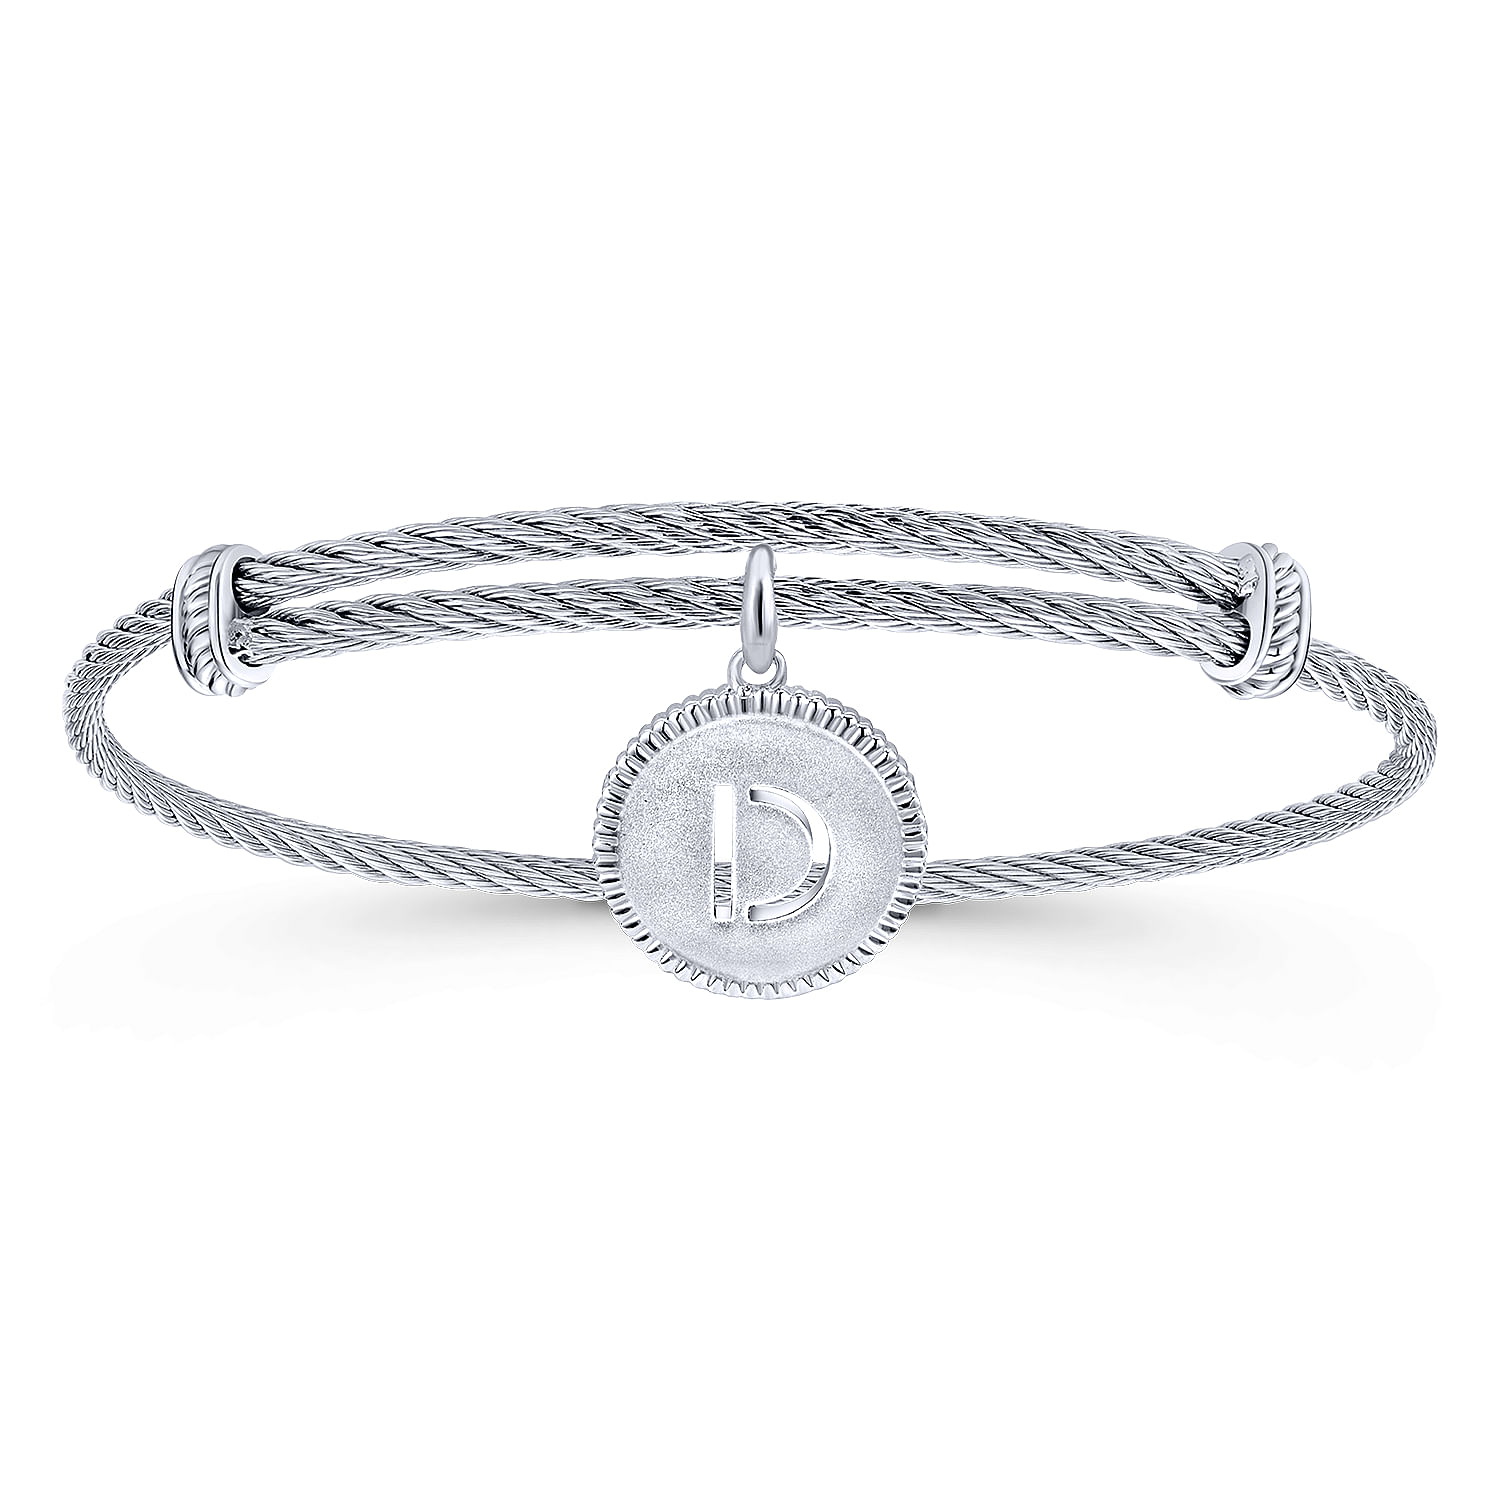 Adjustable Twisted Cable Stainless Steel Bangle with Sterling Silver D Initial Charm